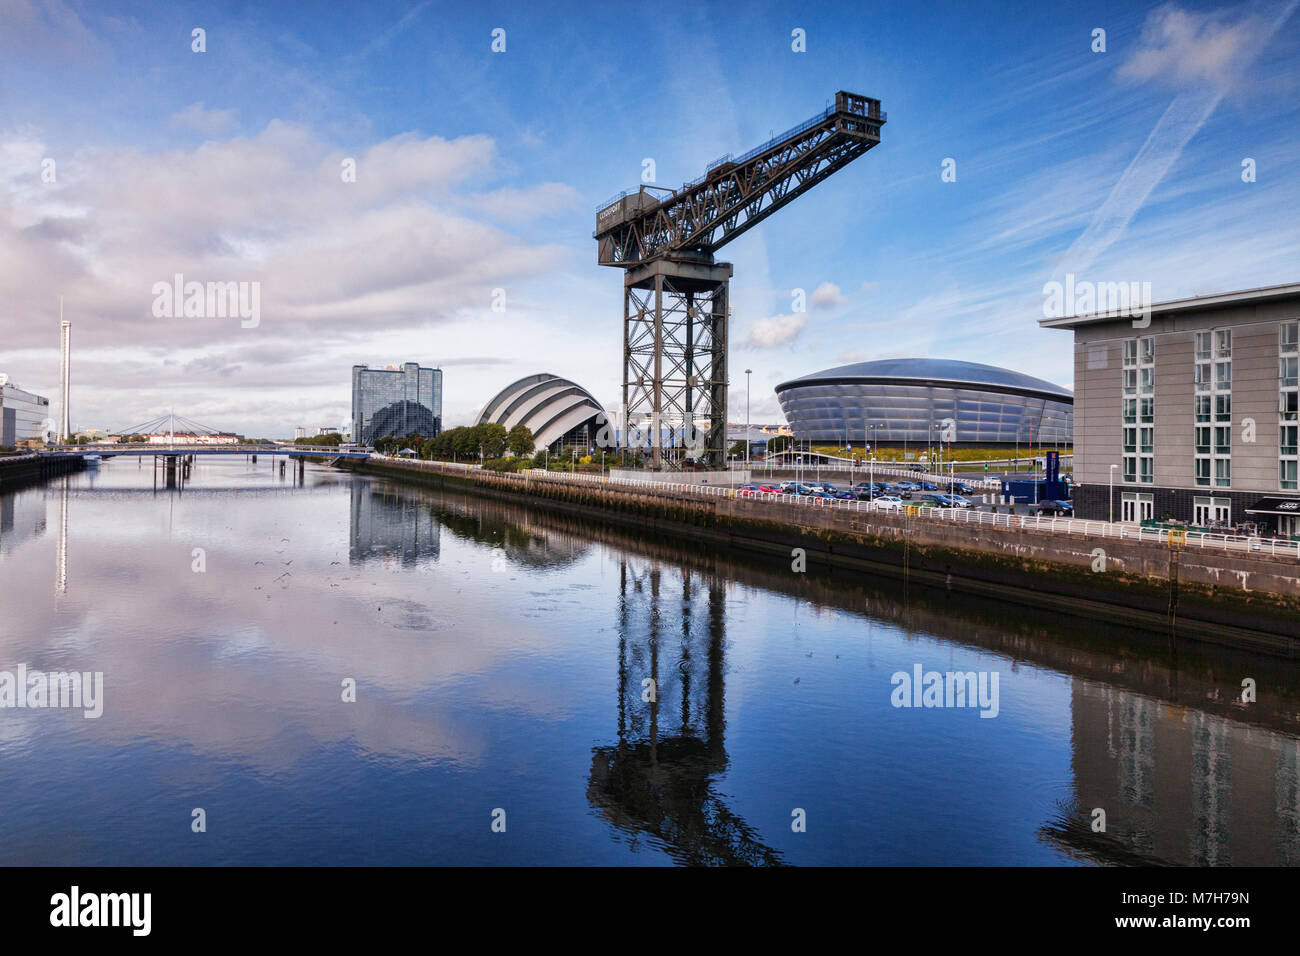 Clyde Waterfront Regeneration, with the Glasgow Tower, the Crowne Plaza Hotel, the SECC, the SSE Hydro and the Finnieston Crane, Glasgow, Scotland, UK Stock Photo